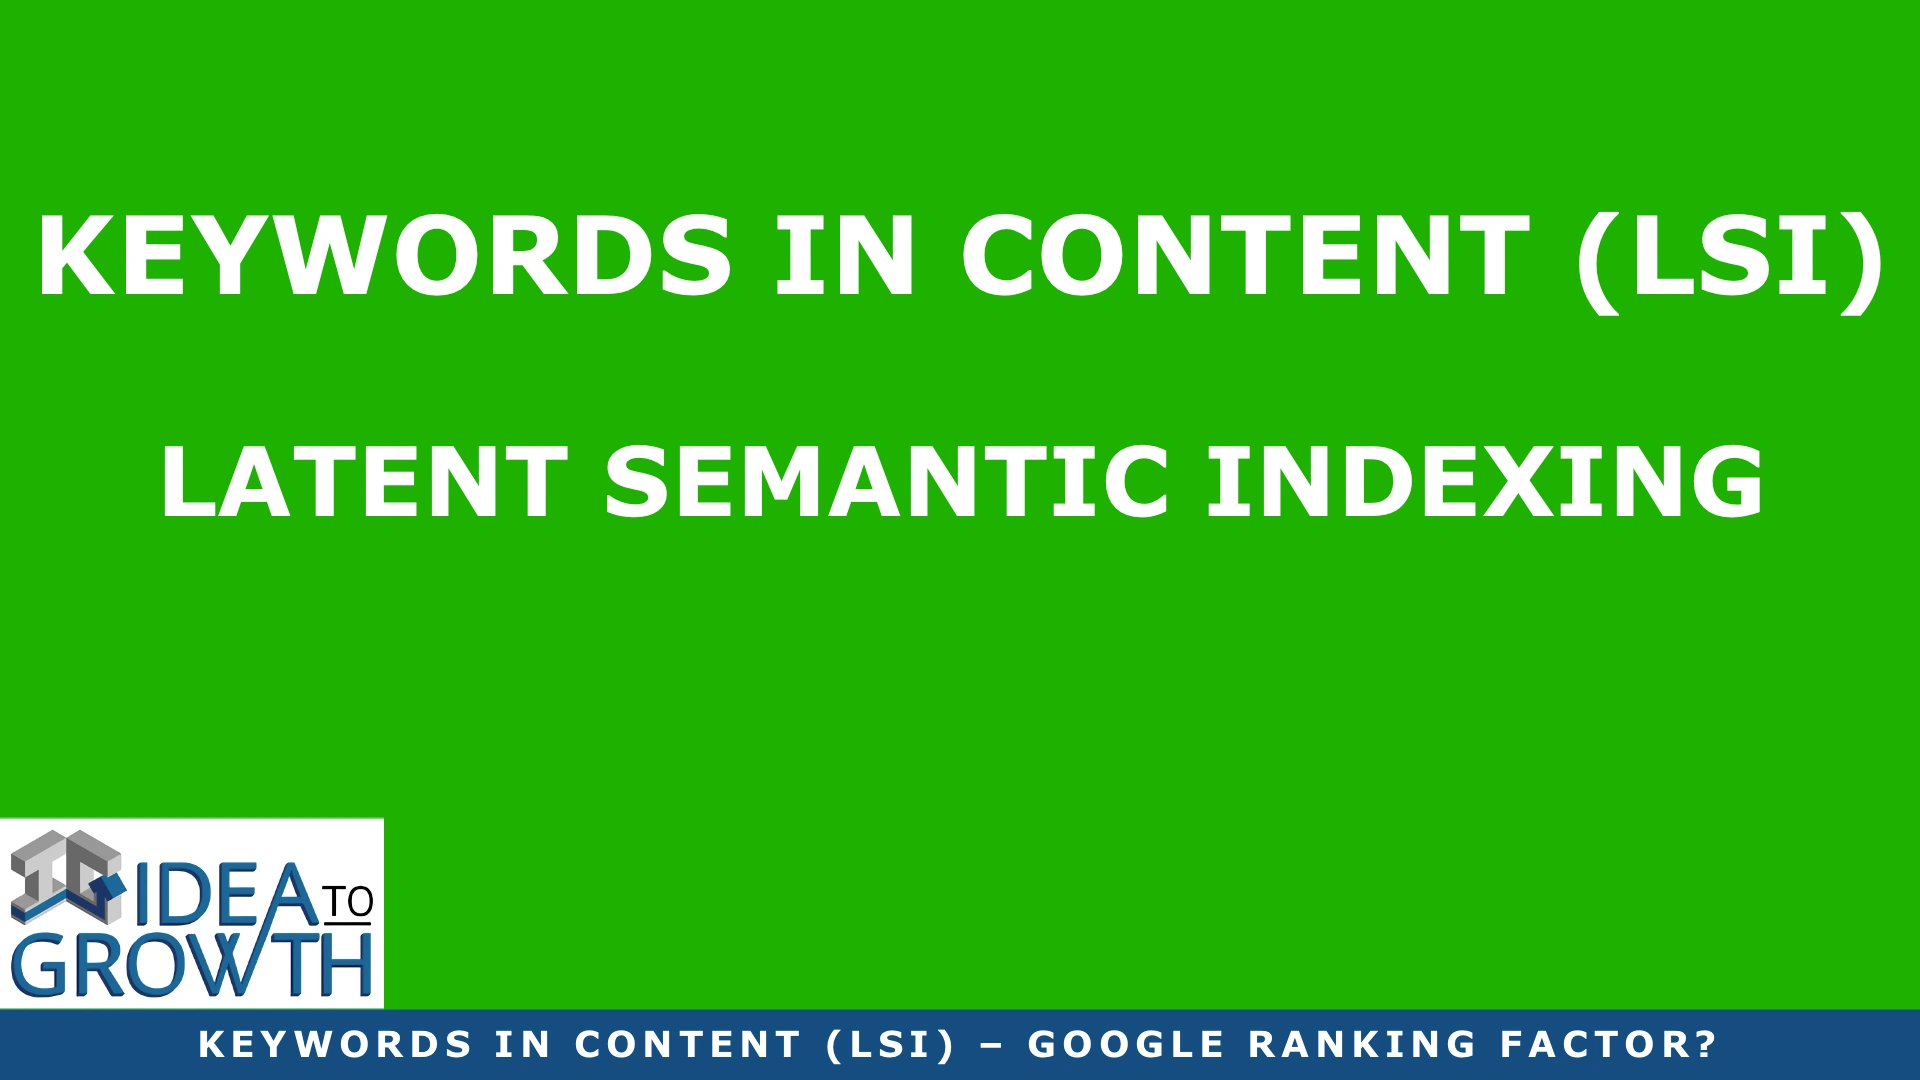 KEYWORDS IN CONTENT (LSI) – GOOGLE RANKING FACTOR?